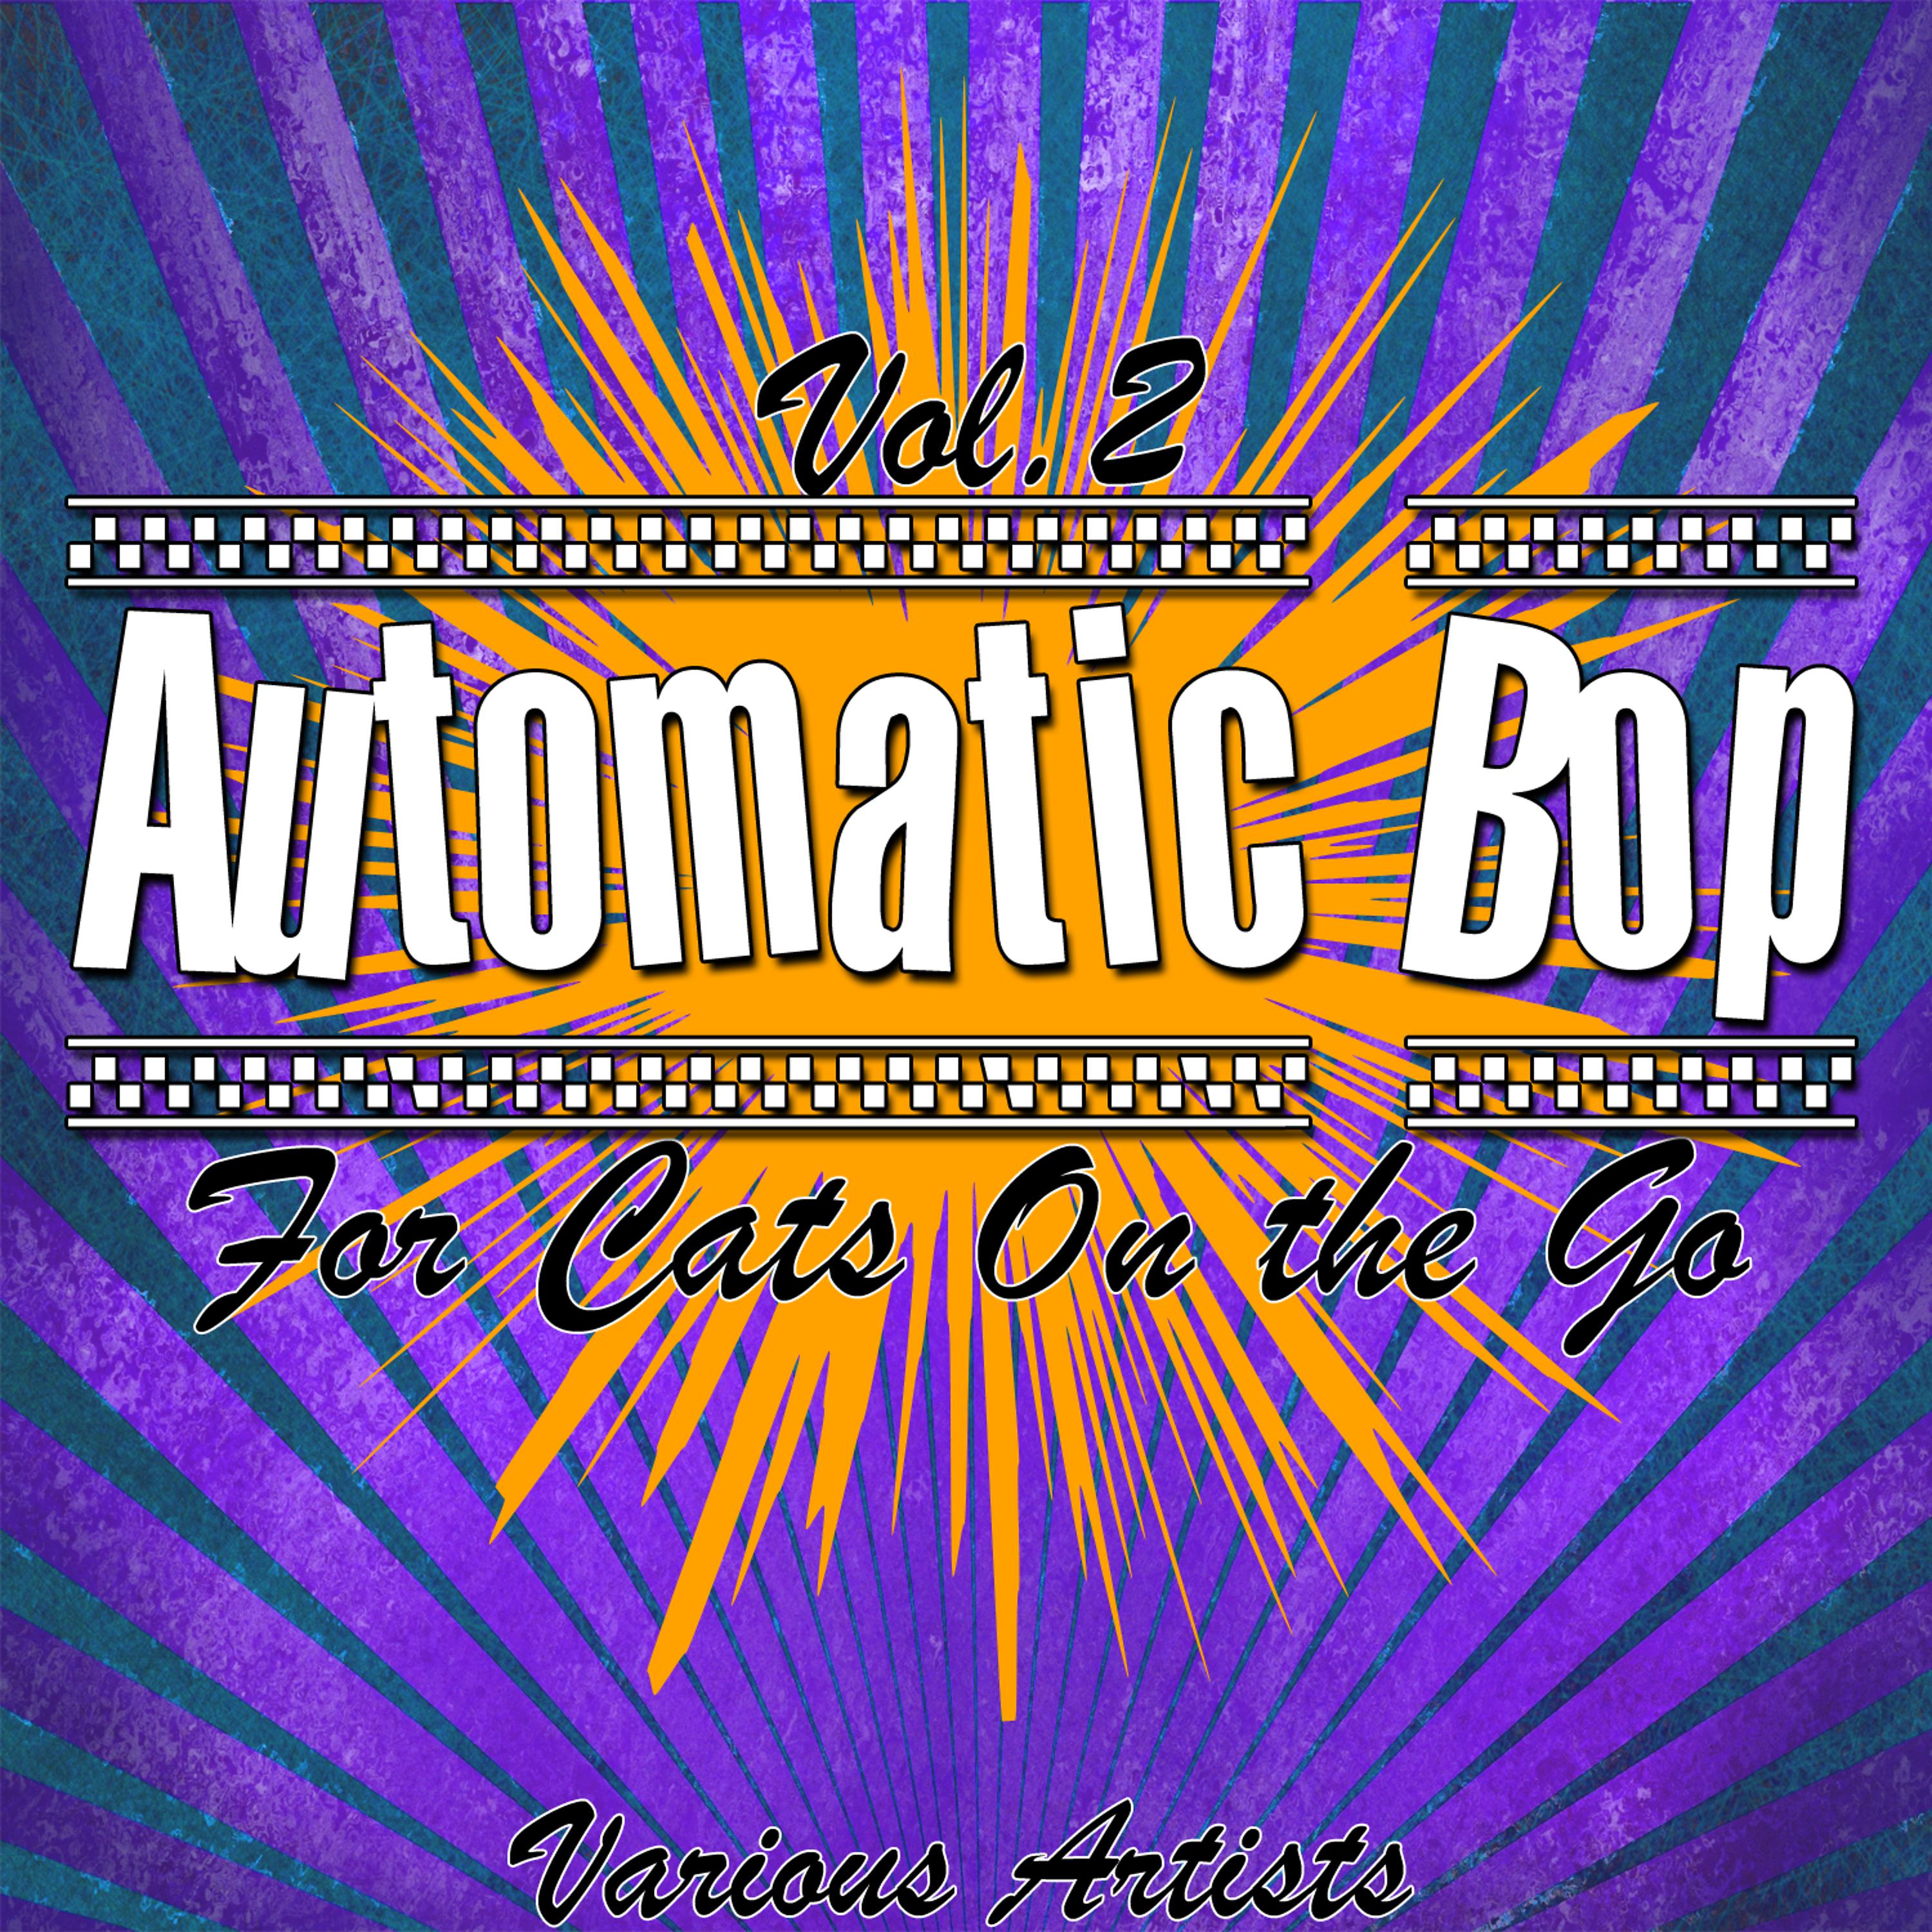 Постер альбома Automatic Bop Vol. 2 - For Cats On the Go